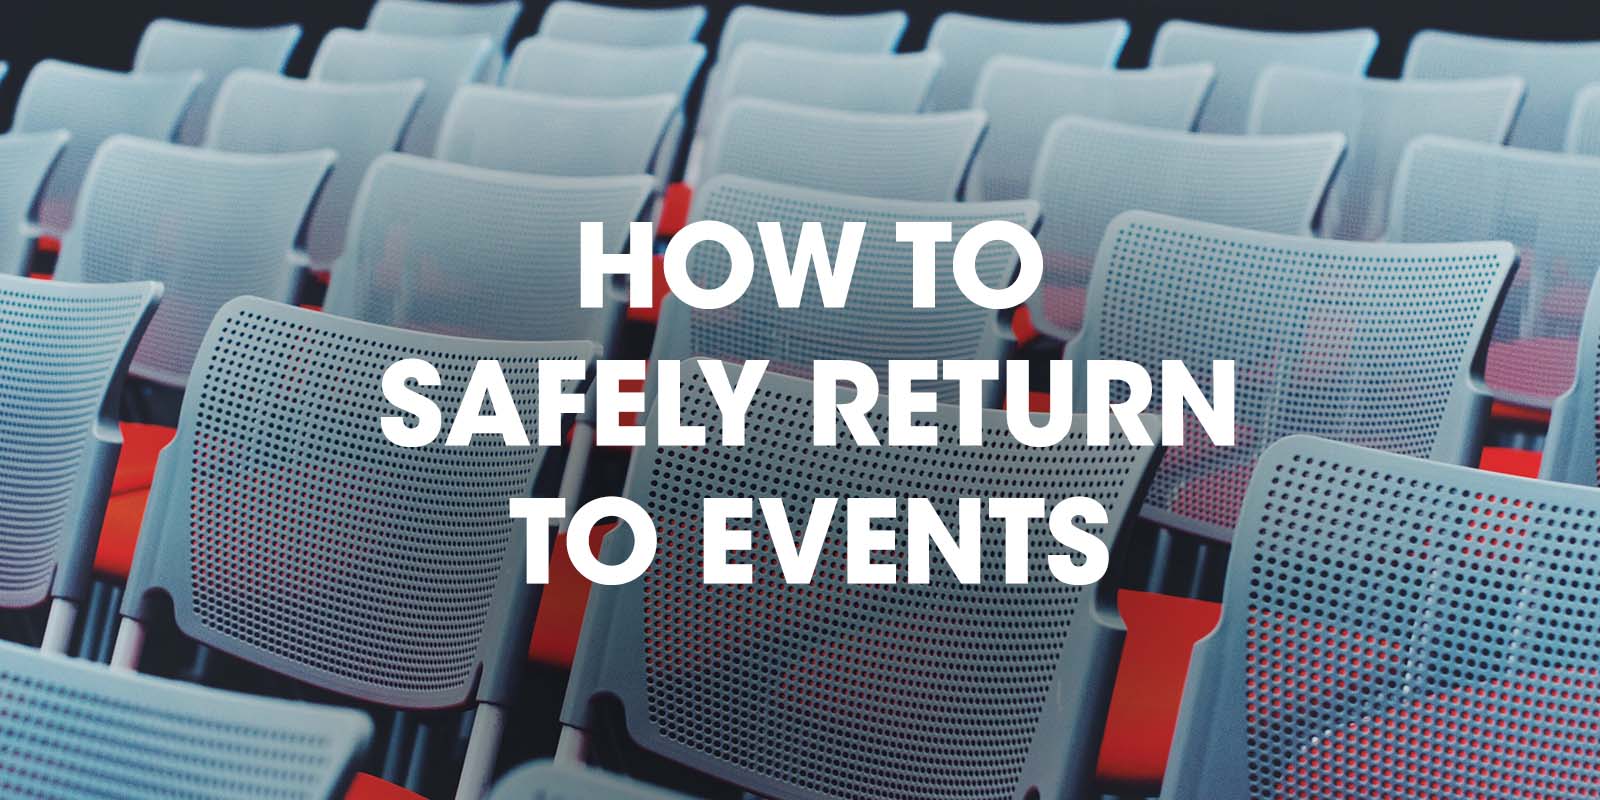 Safely return to events